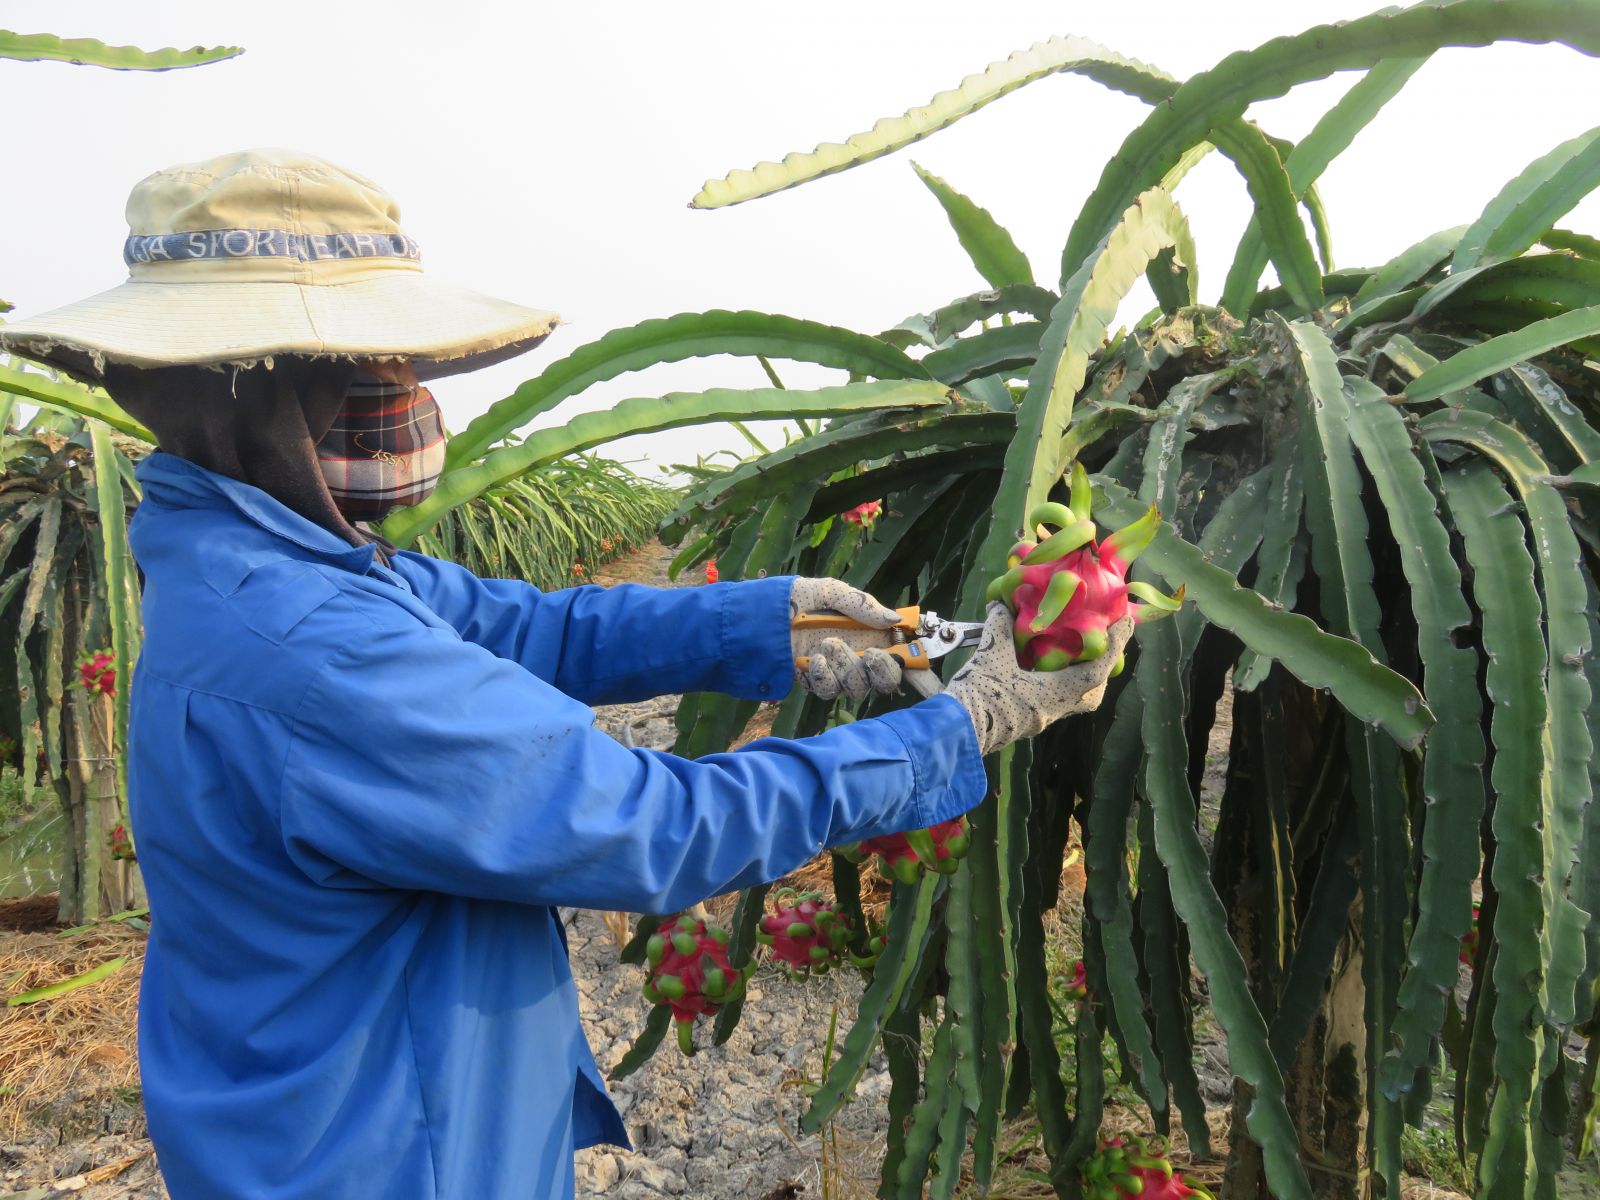 Dragon fruit has another sales channel, Bach Hoa Xanh, through the Long An Dragon Fruit Association